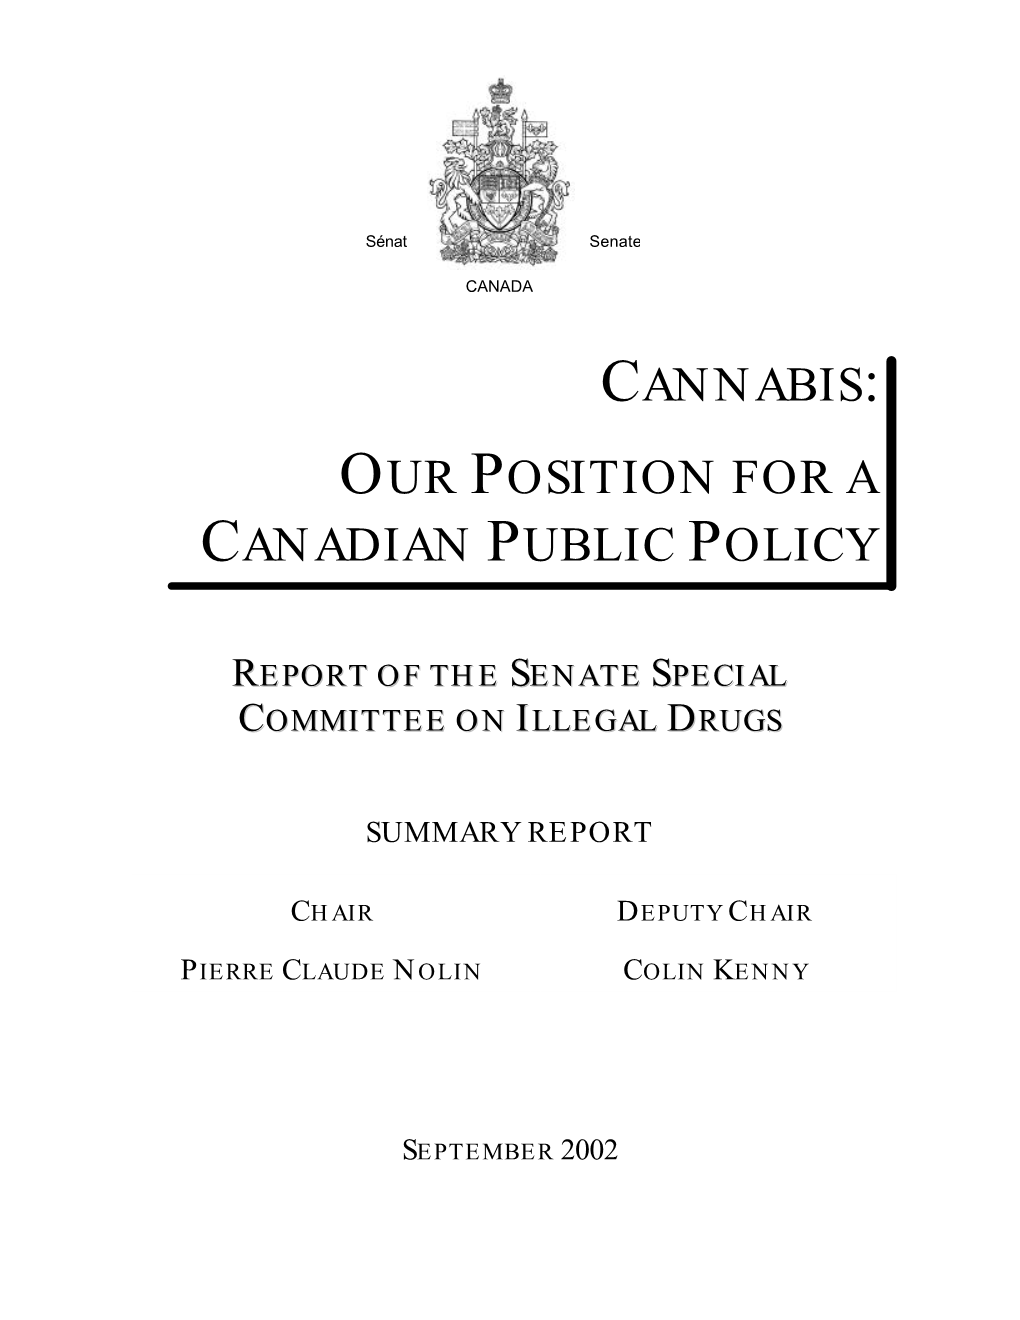 Cannabis: Our Position for a Canadian Public Policy